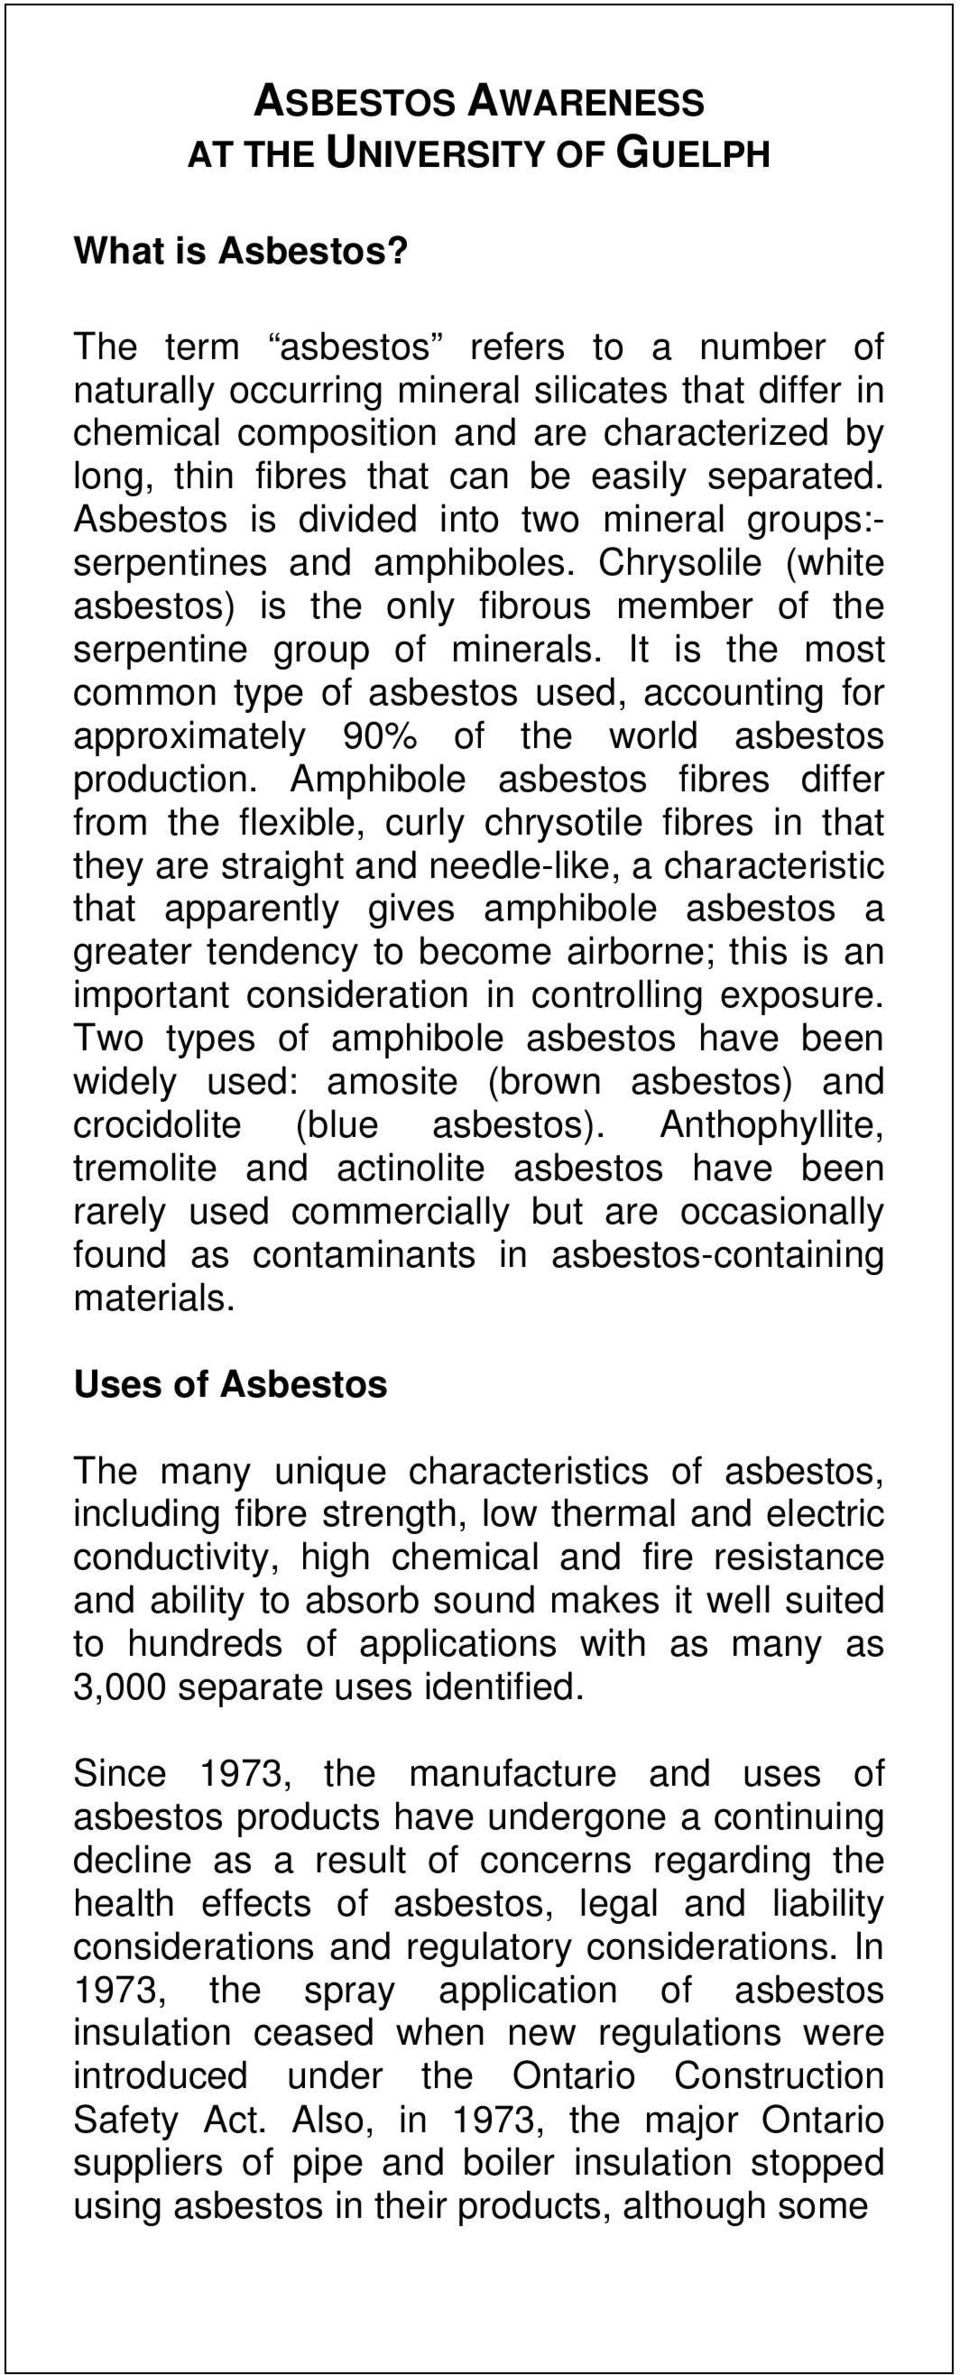 Asbestos is divided into two mineral groups:- serpentines and amphiboles. Chrysolile (white asbestos) is the only fibrous member of the serpentine group of minerals.